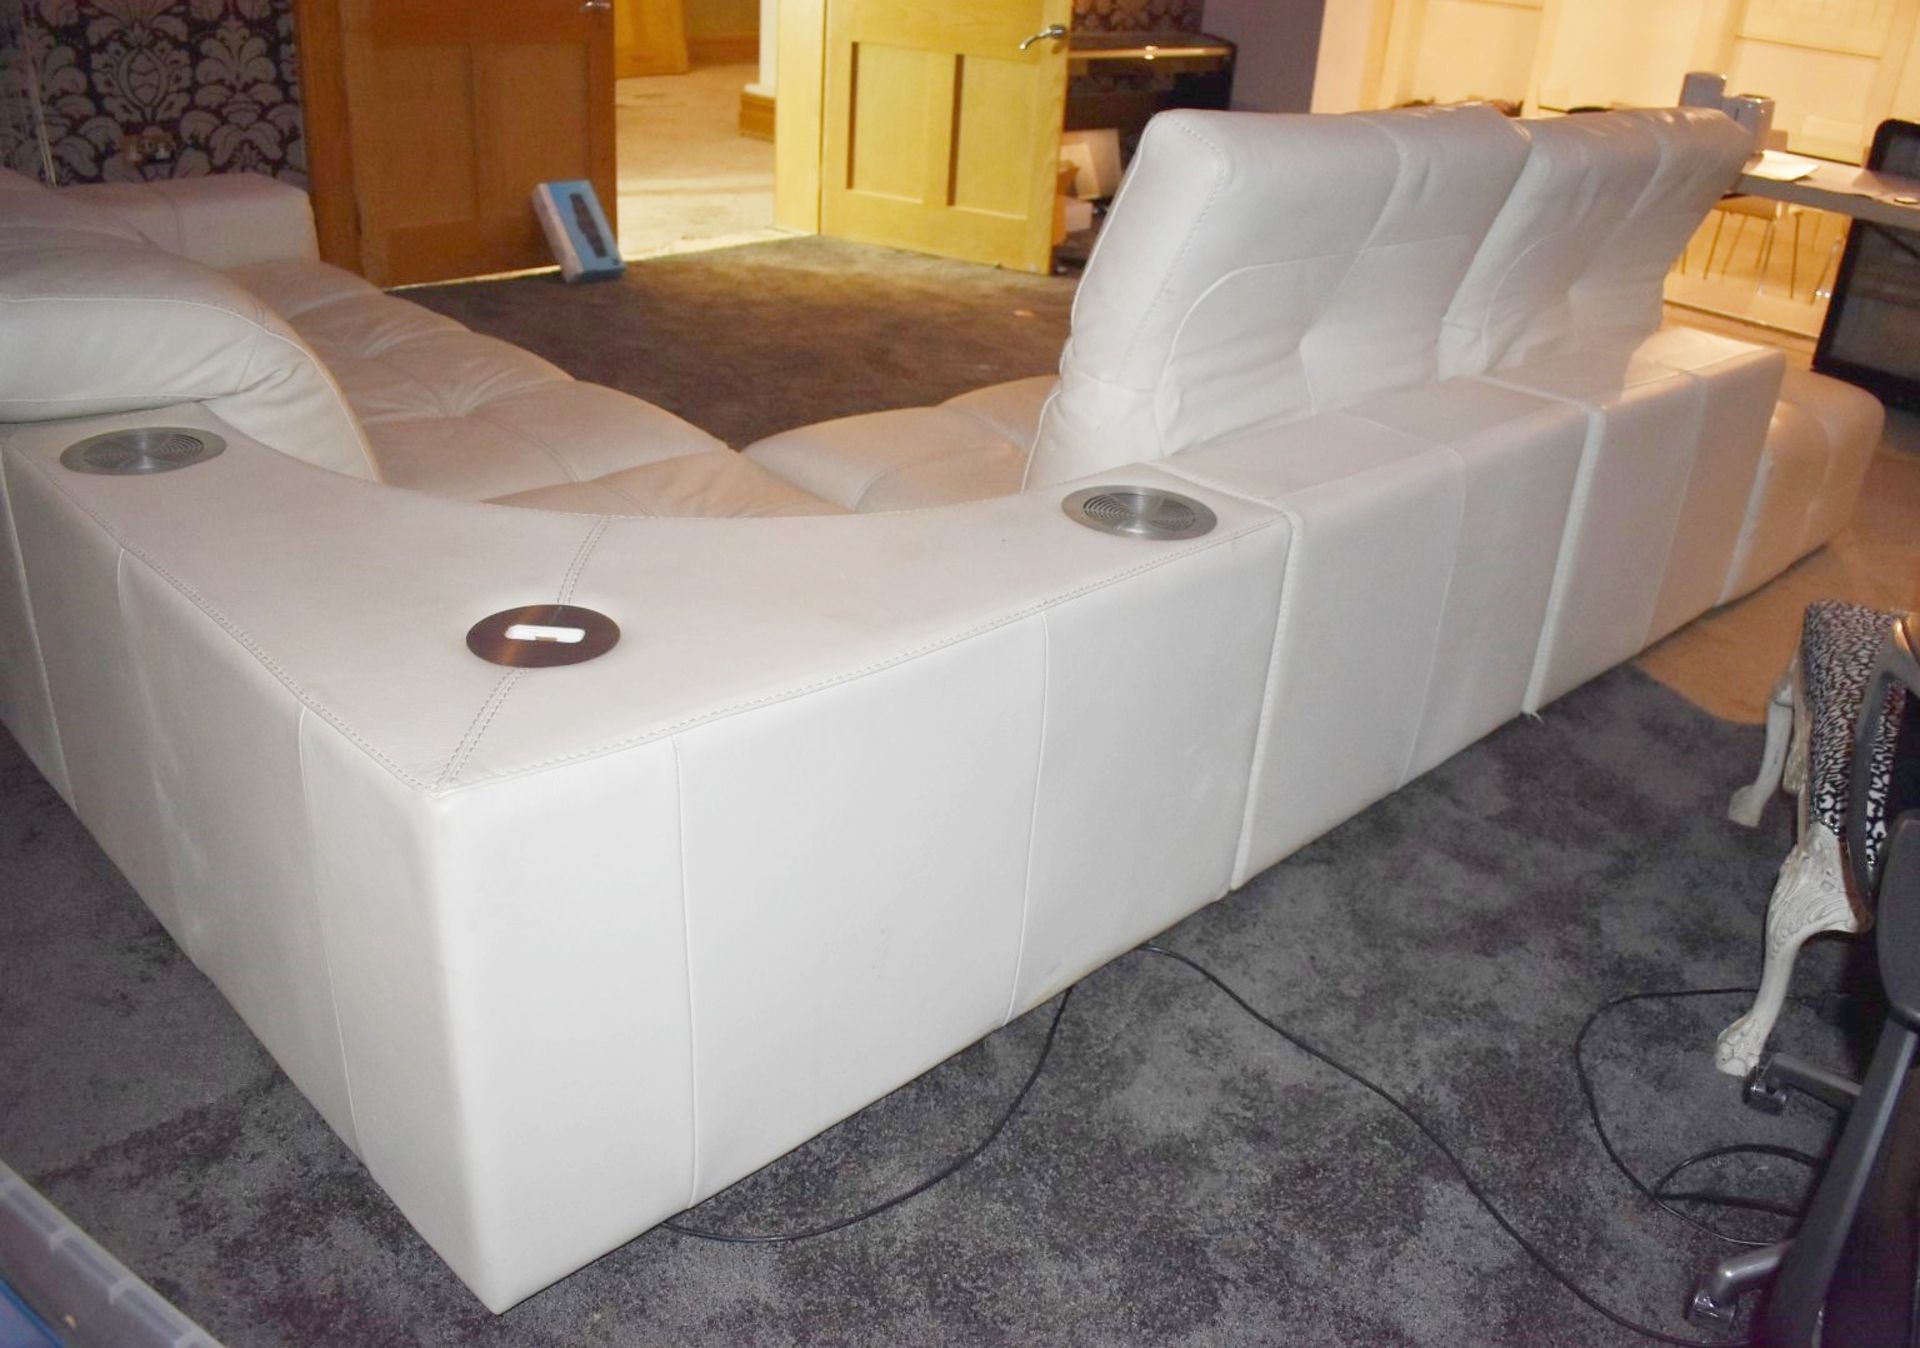 1 x NATUZZI Luxury White Leather Corner Sofa With Integrated Stereo Speakers And iPhone Dock - Cream - Image 11 of 13